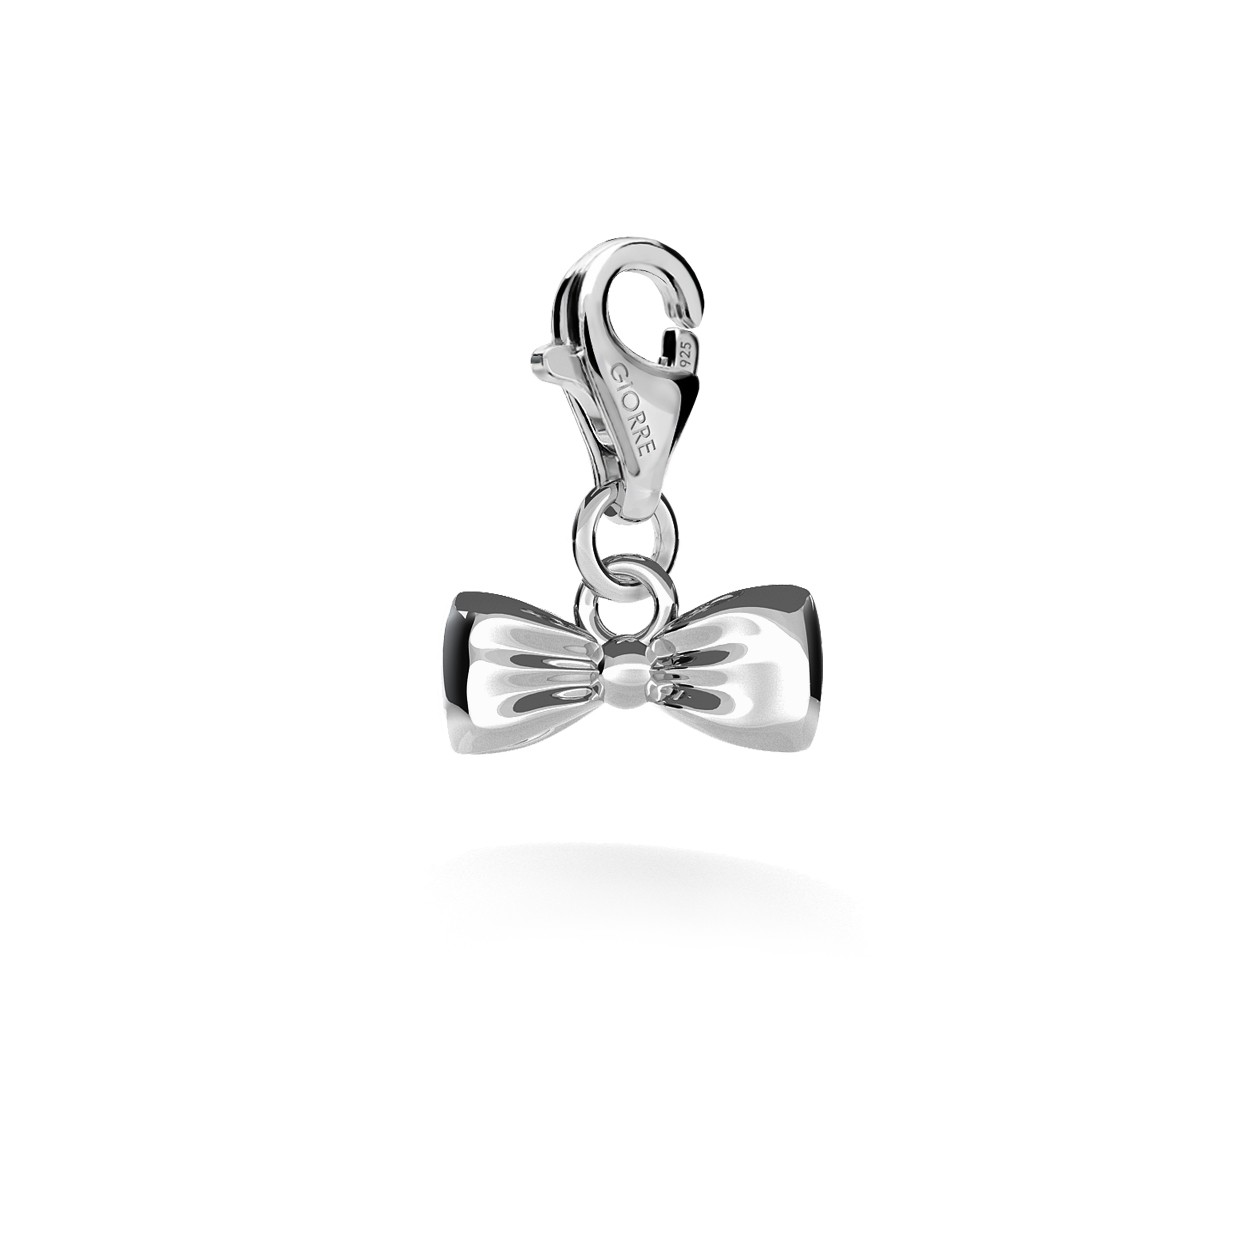 CHARM 32, BOW, SILVER 925, RHODIUM OR GOLD PLATED